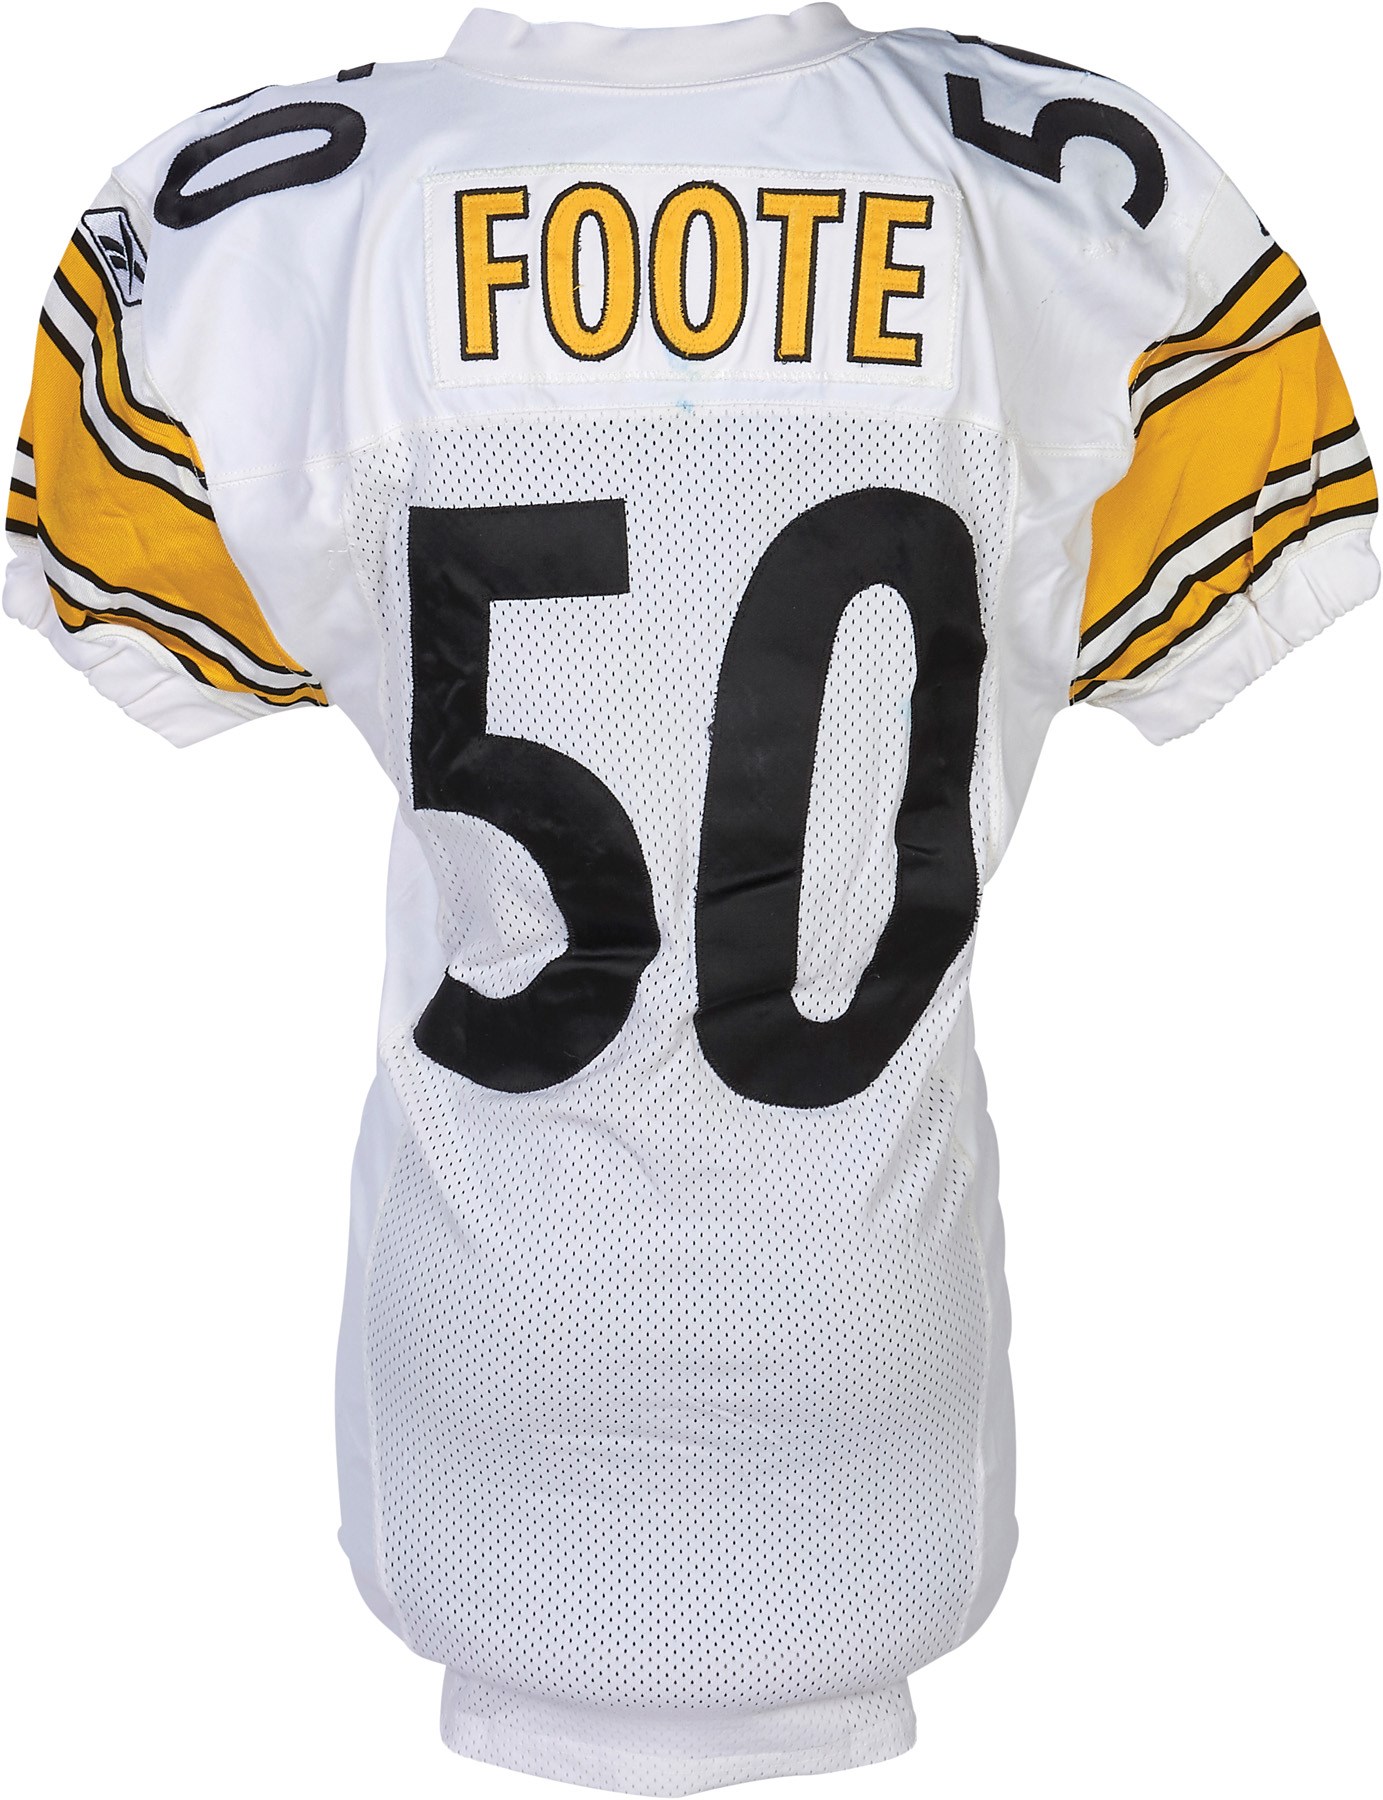 The Pittsburgh Steelers Game Worn Jersey Archive - 2002 Larry Foote Pittsburgh Steelers AFC Divisional Game Worn Jersey (Photo-Matched)